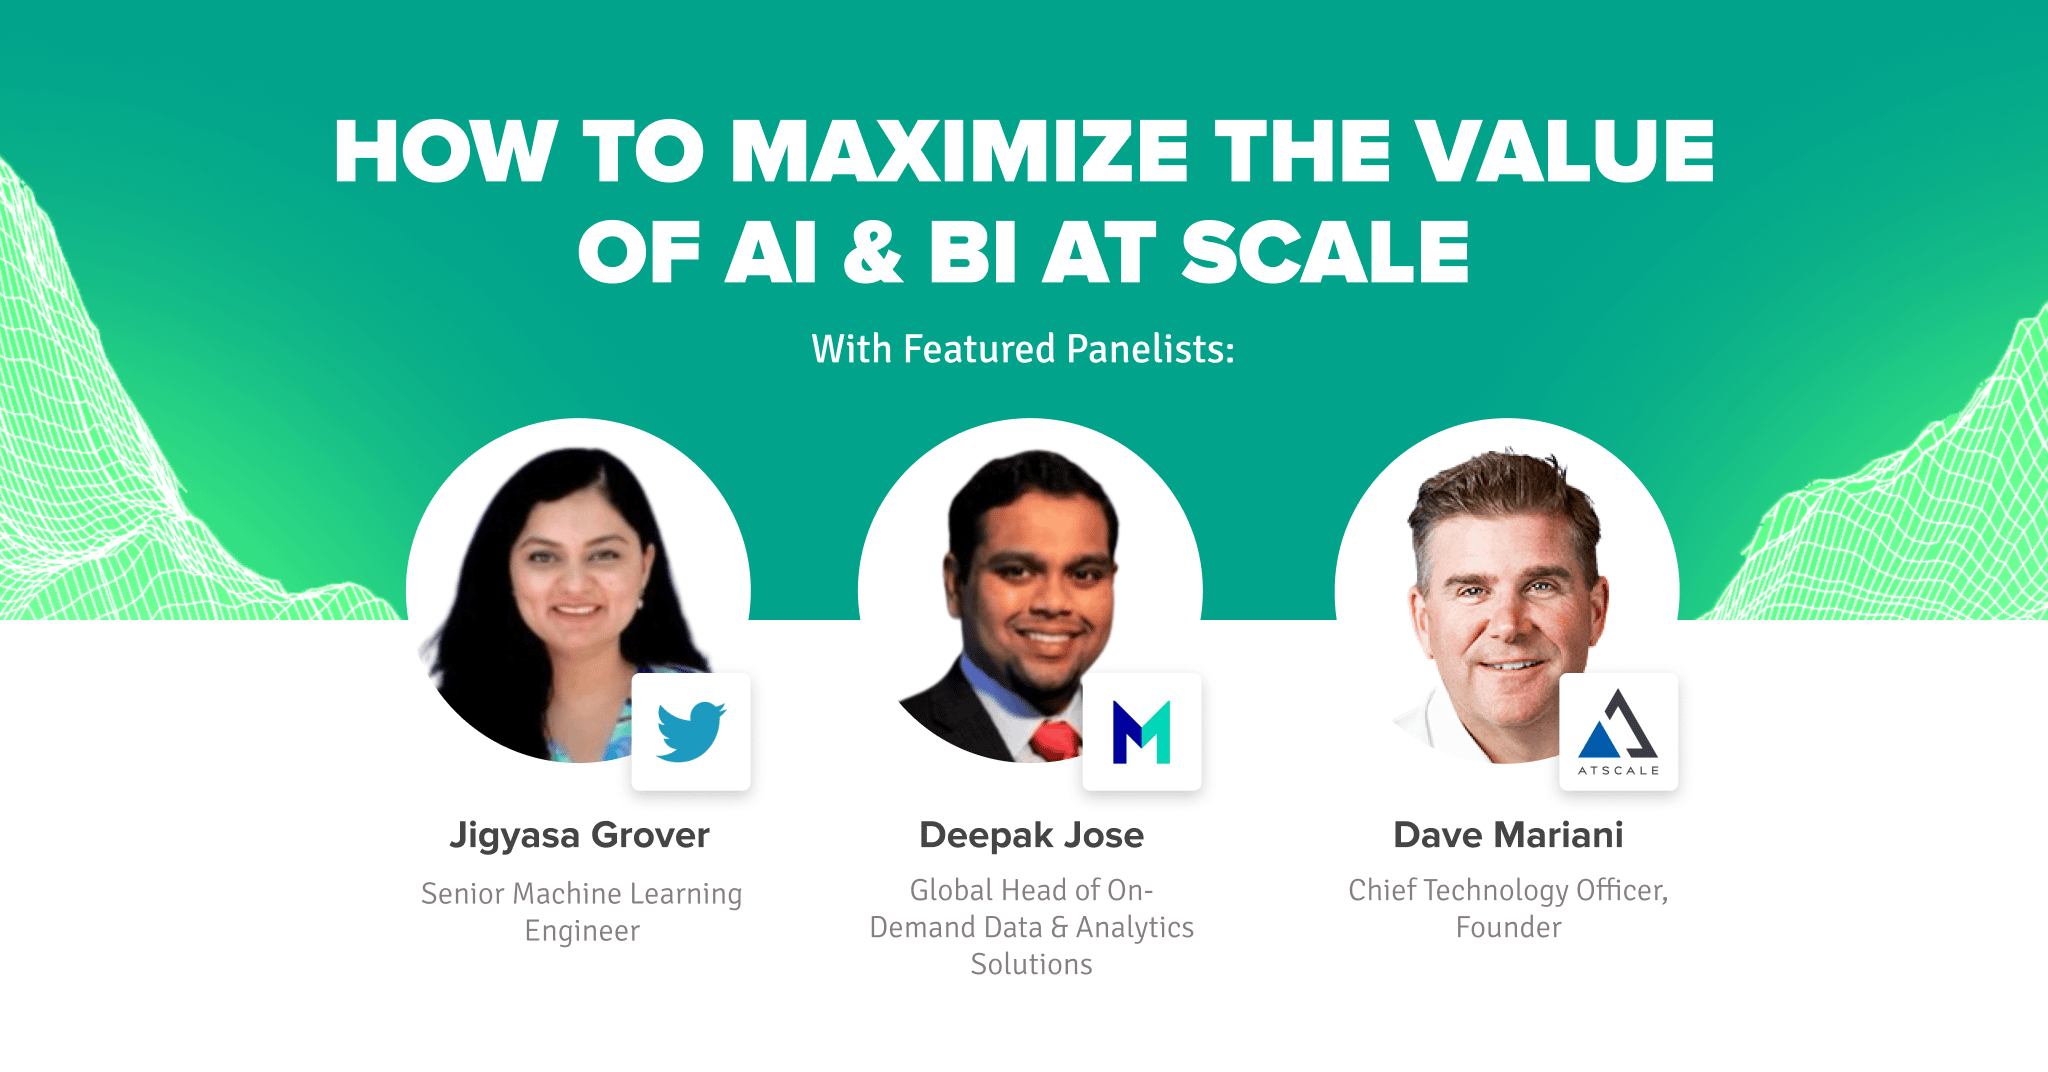 How to Maximize the Value of AI and BI at Scale